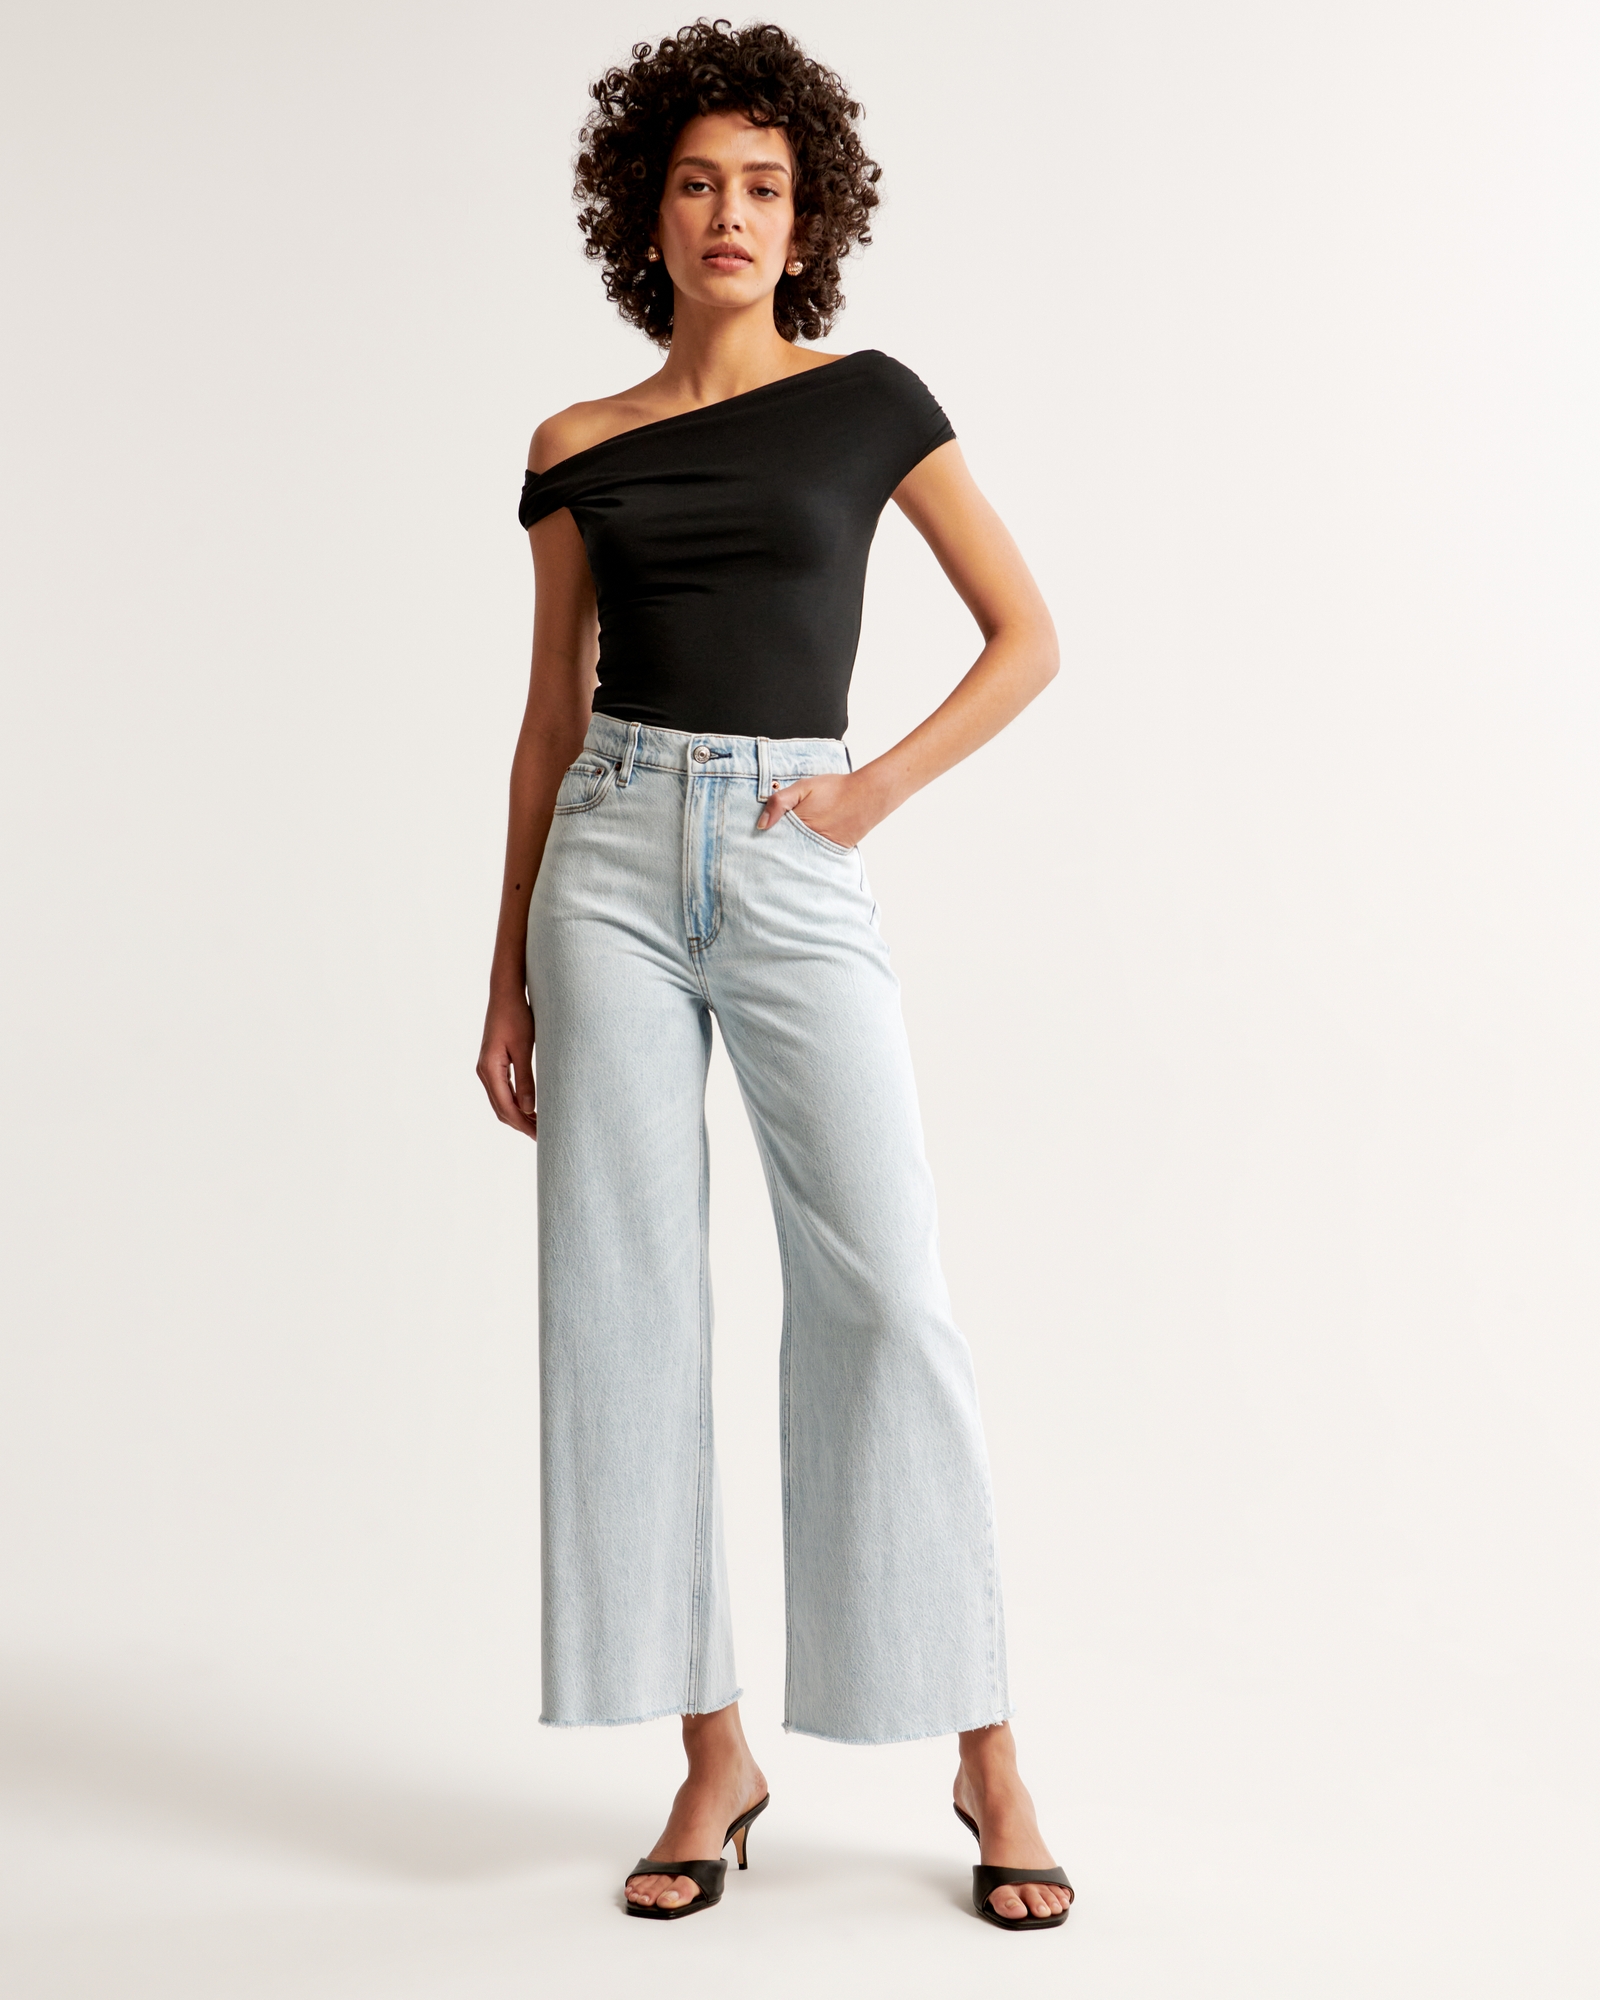 Off-The-Shoulder Tops for sale in Calgary, Alberta